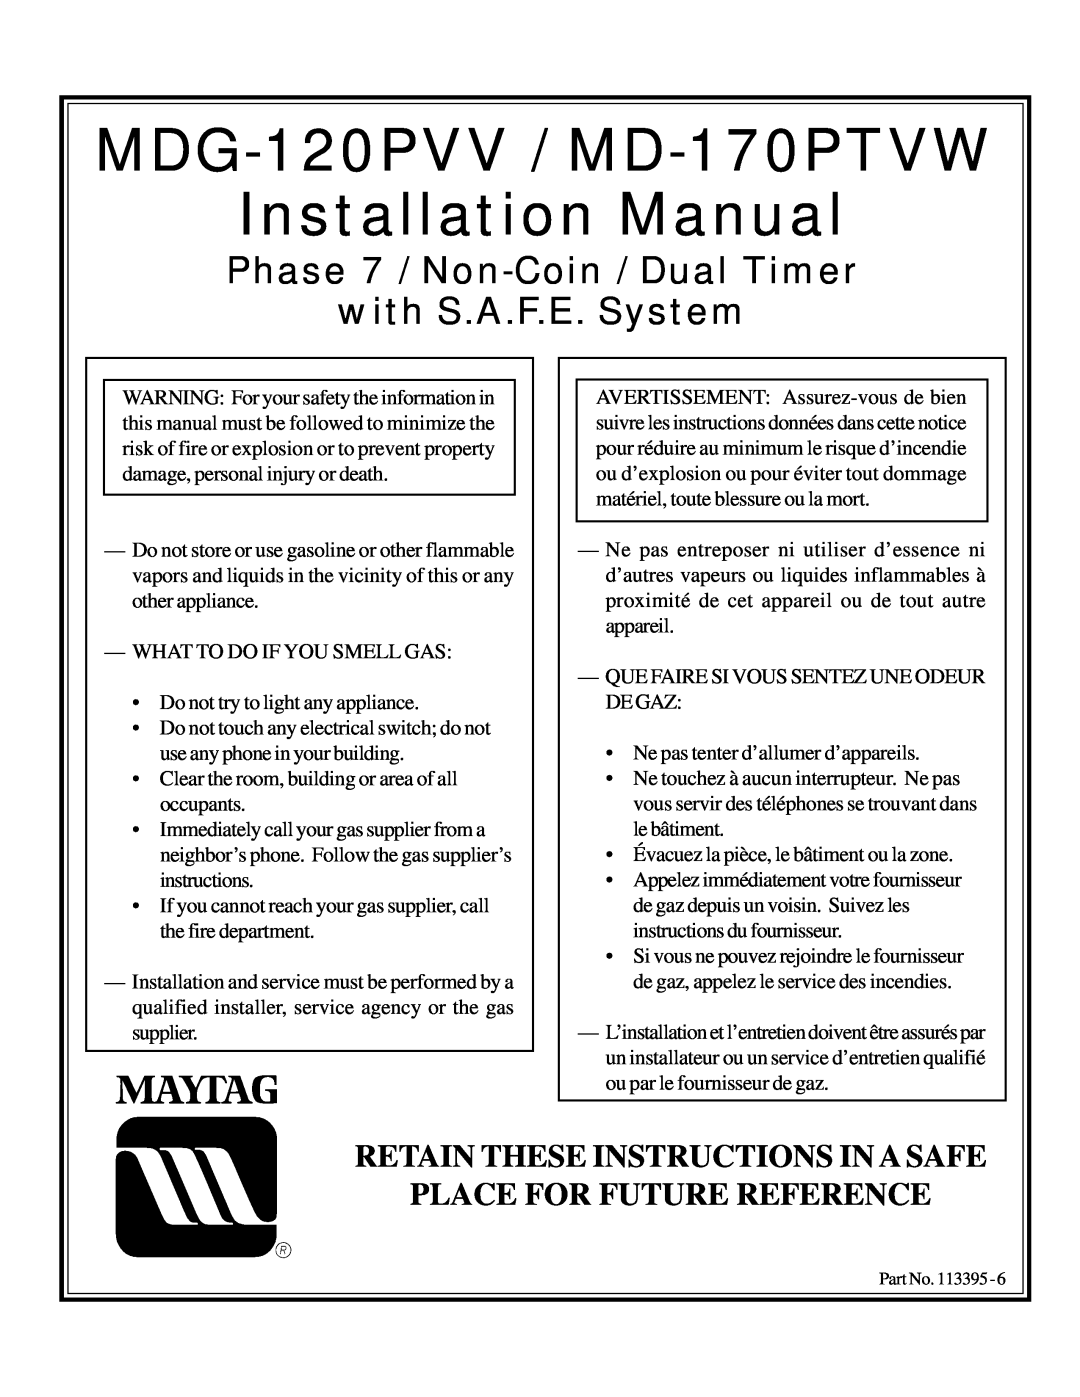 American Dryer Corp MDG-120PVV, MD-170PTVW installation manual Phase 7 / Non-Coin / Dual Timer with S.A.F.E. System 